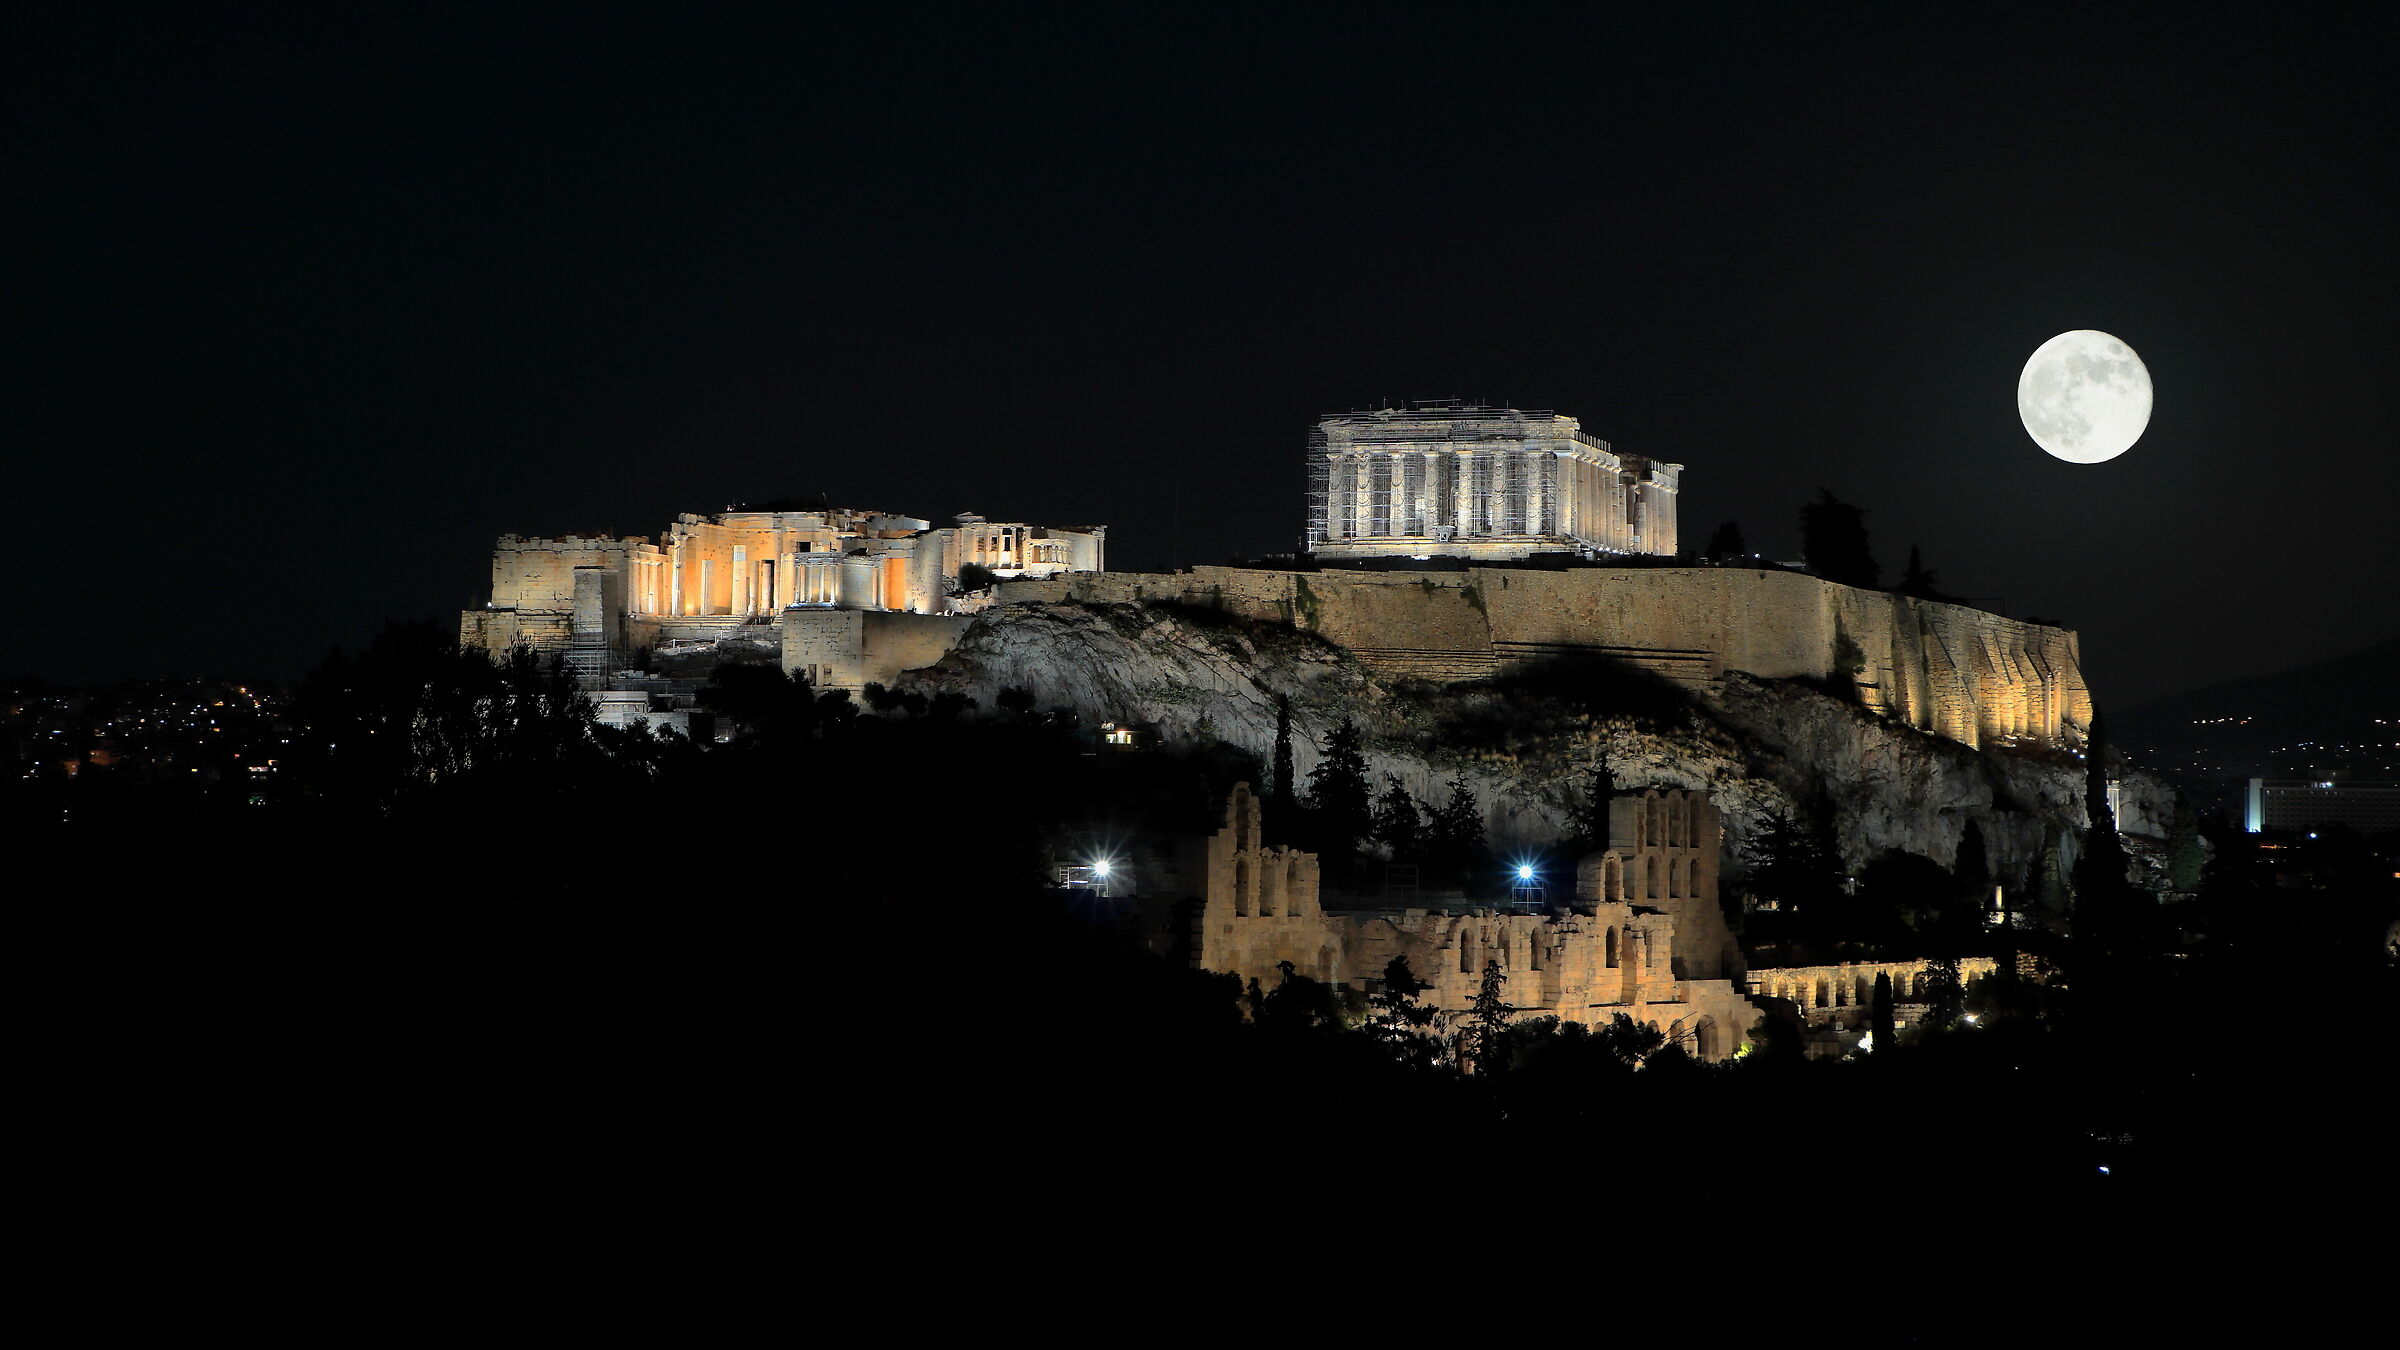 The Acropolis in the moonlight...